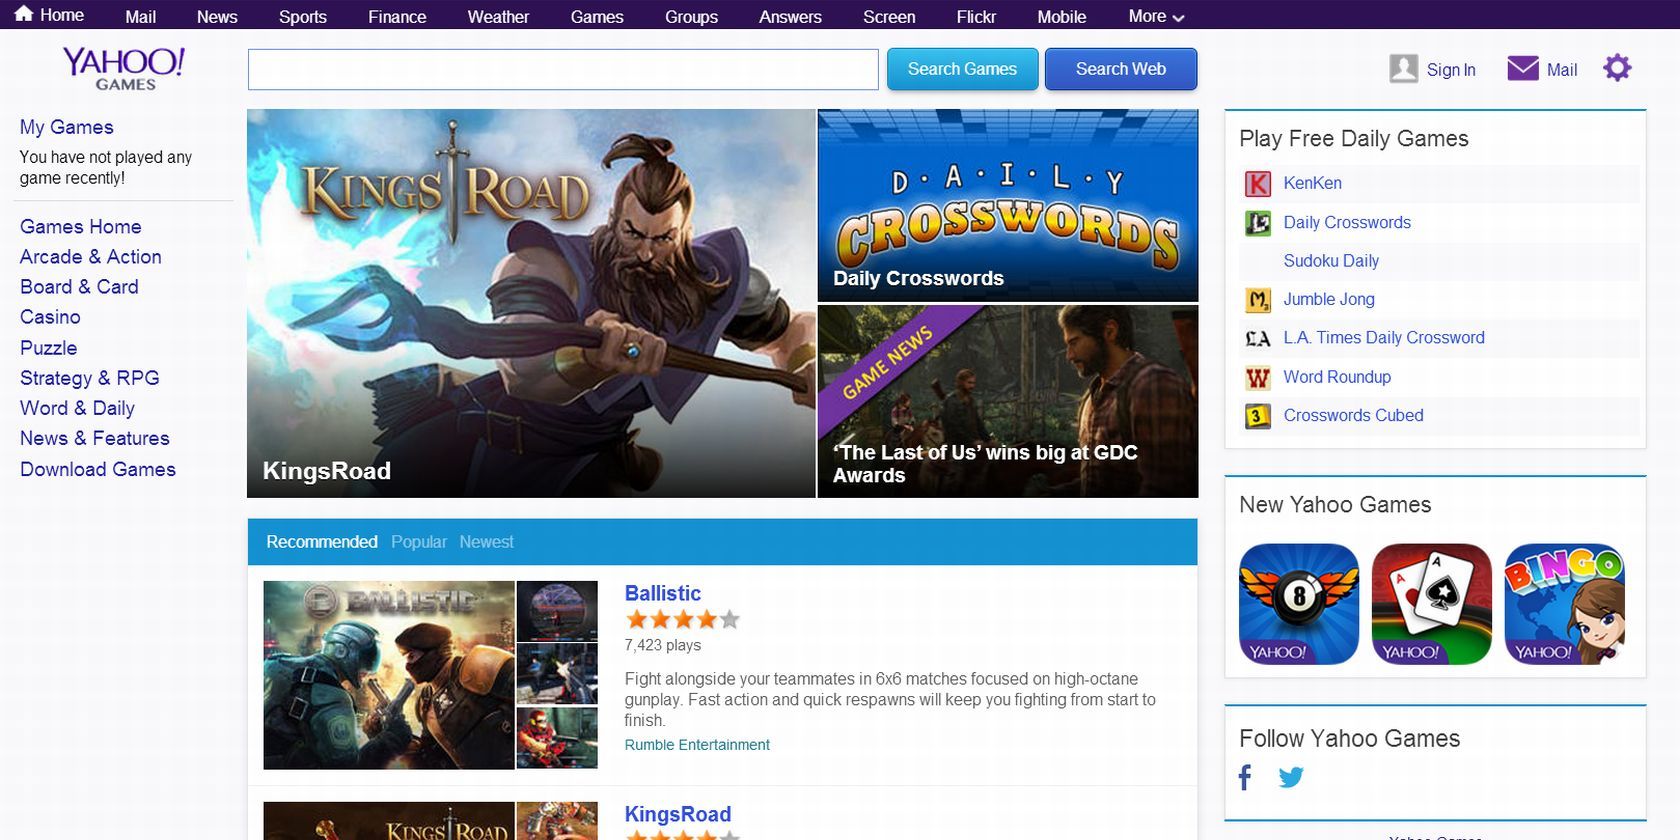 Yahoo launches new Classic Games site for Web, Android and iOS